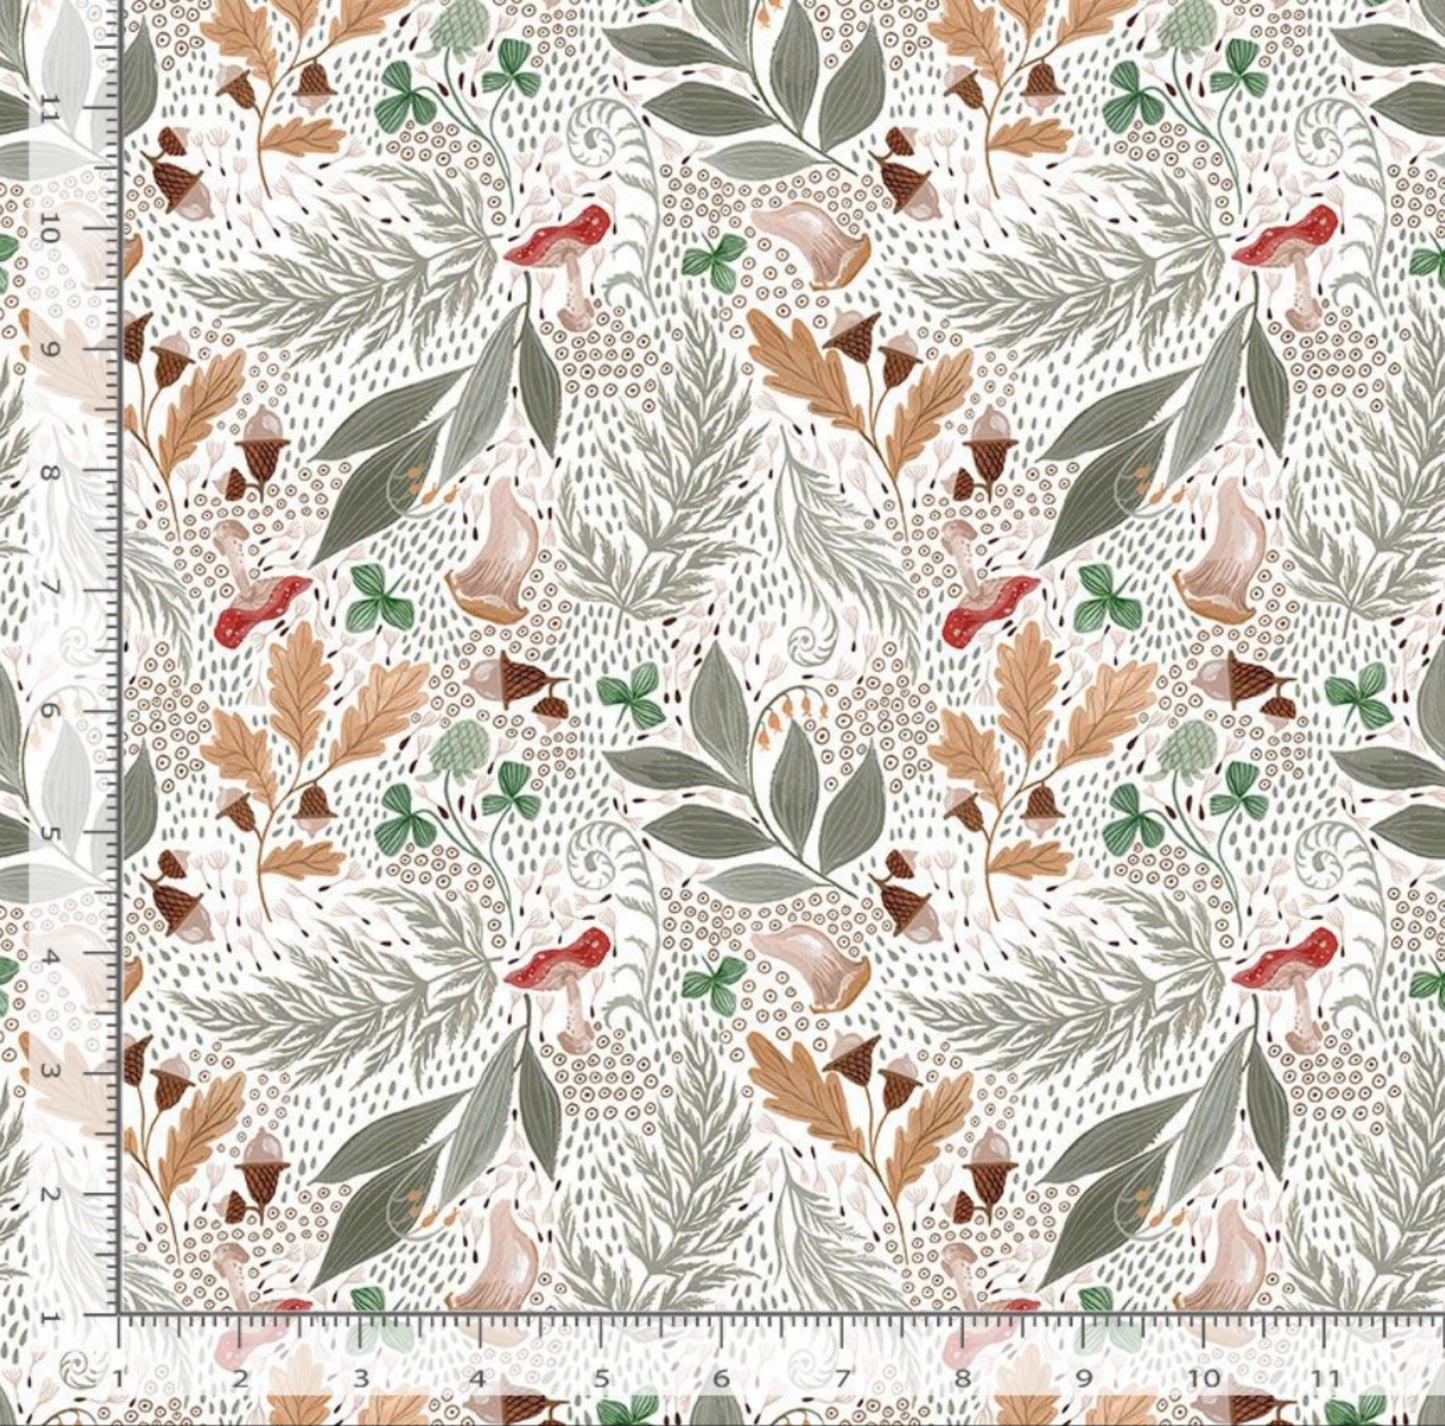 Mystic Floral - Goblincore Collection by Rae Ritchie for Dear Stella Fabrics - DRR2540 - White